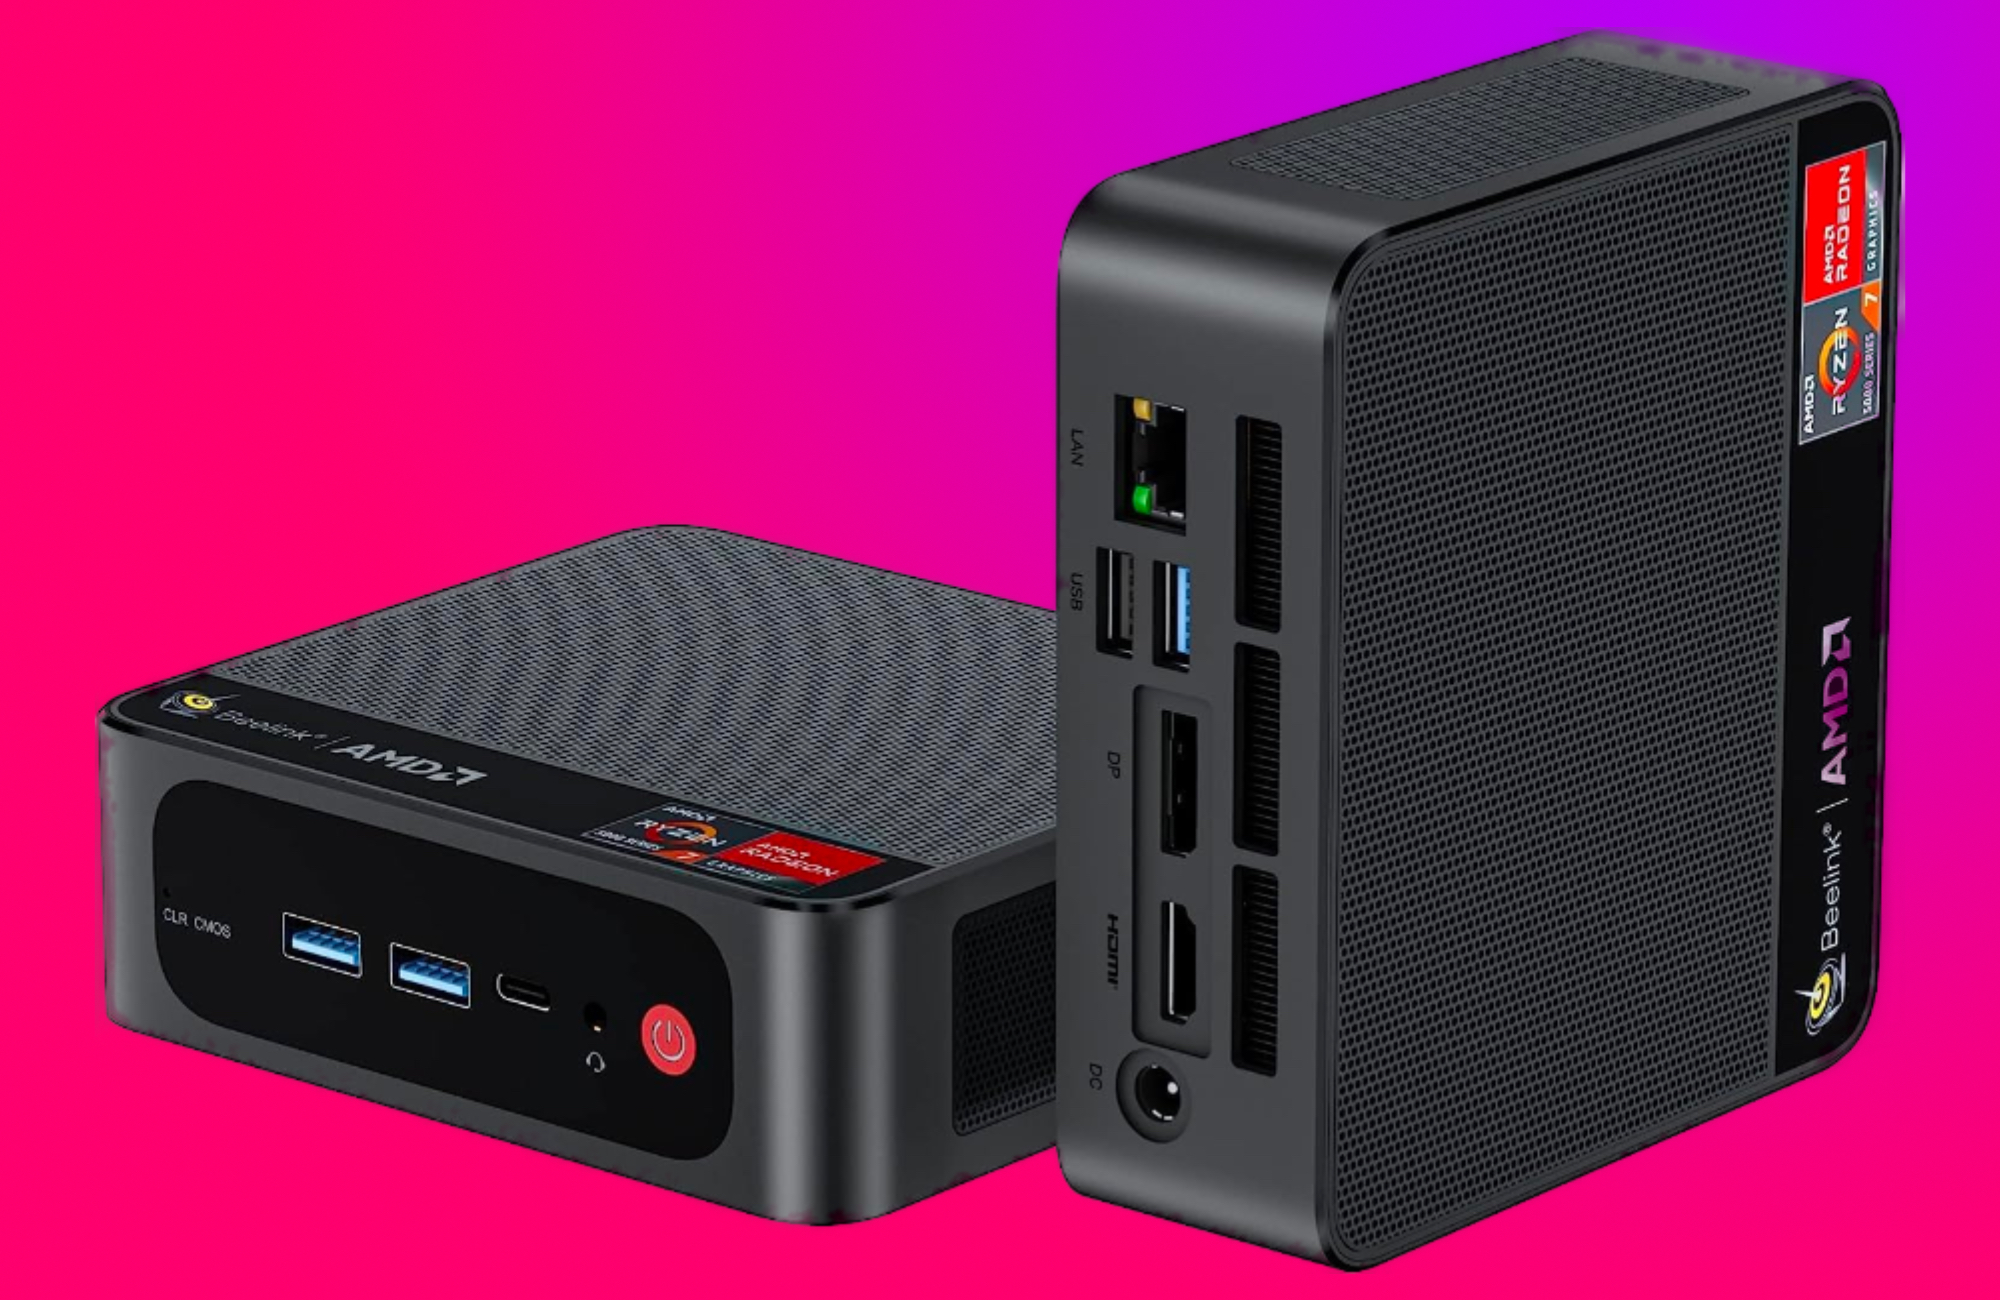 Save big on the best mini PCs for students, servers & more